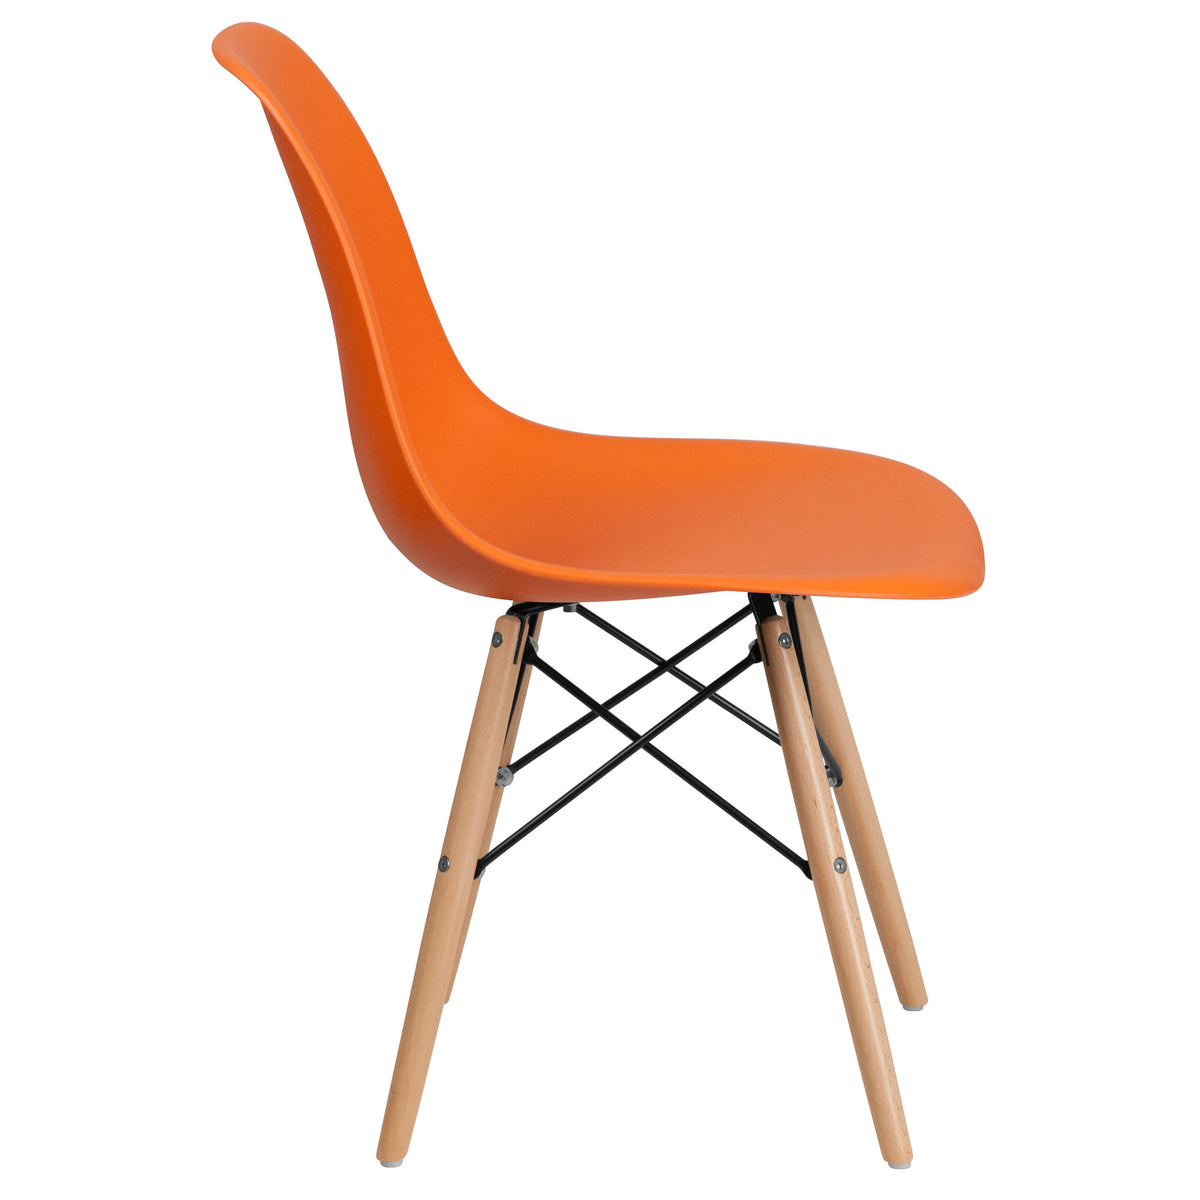 Orange |#| Orange Plastic Chair with Wooden Legs - Hospitality Seating - Side Chair